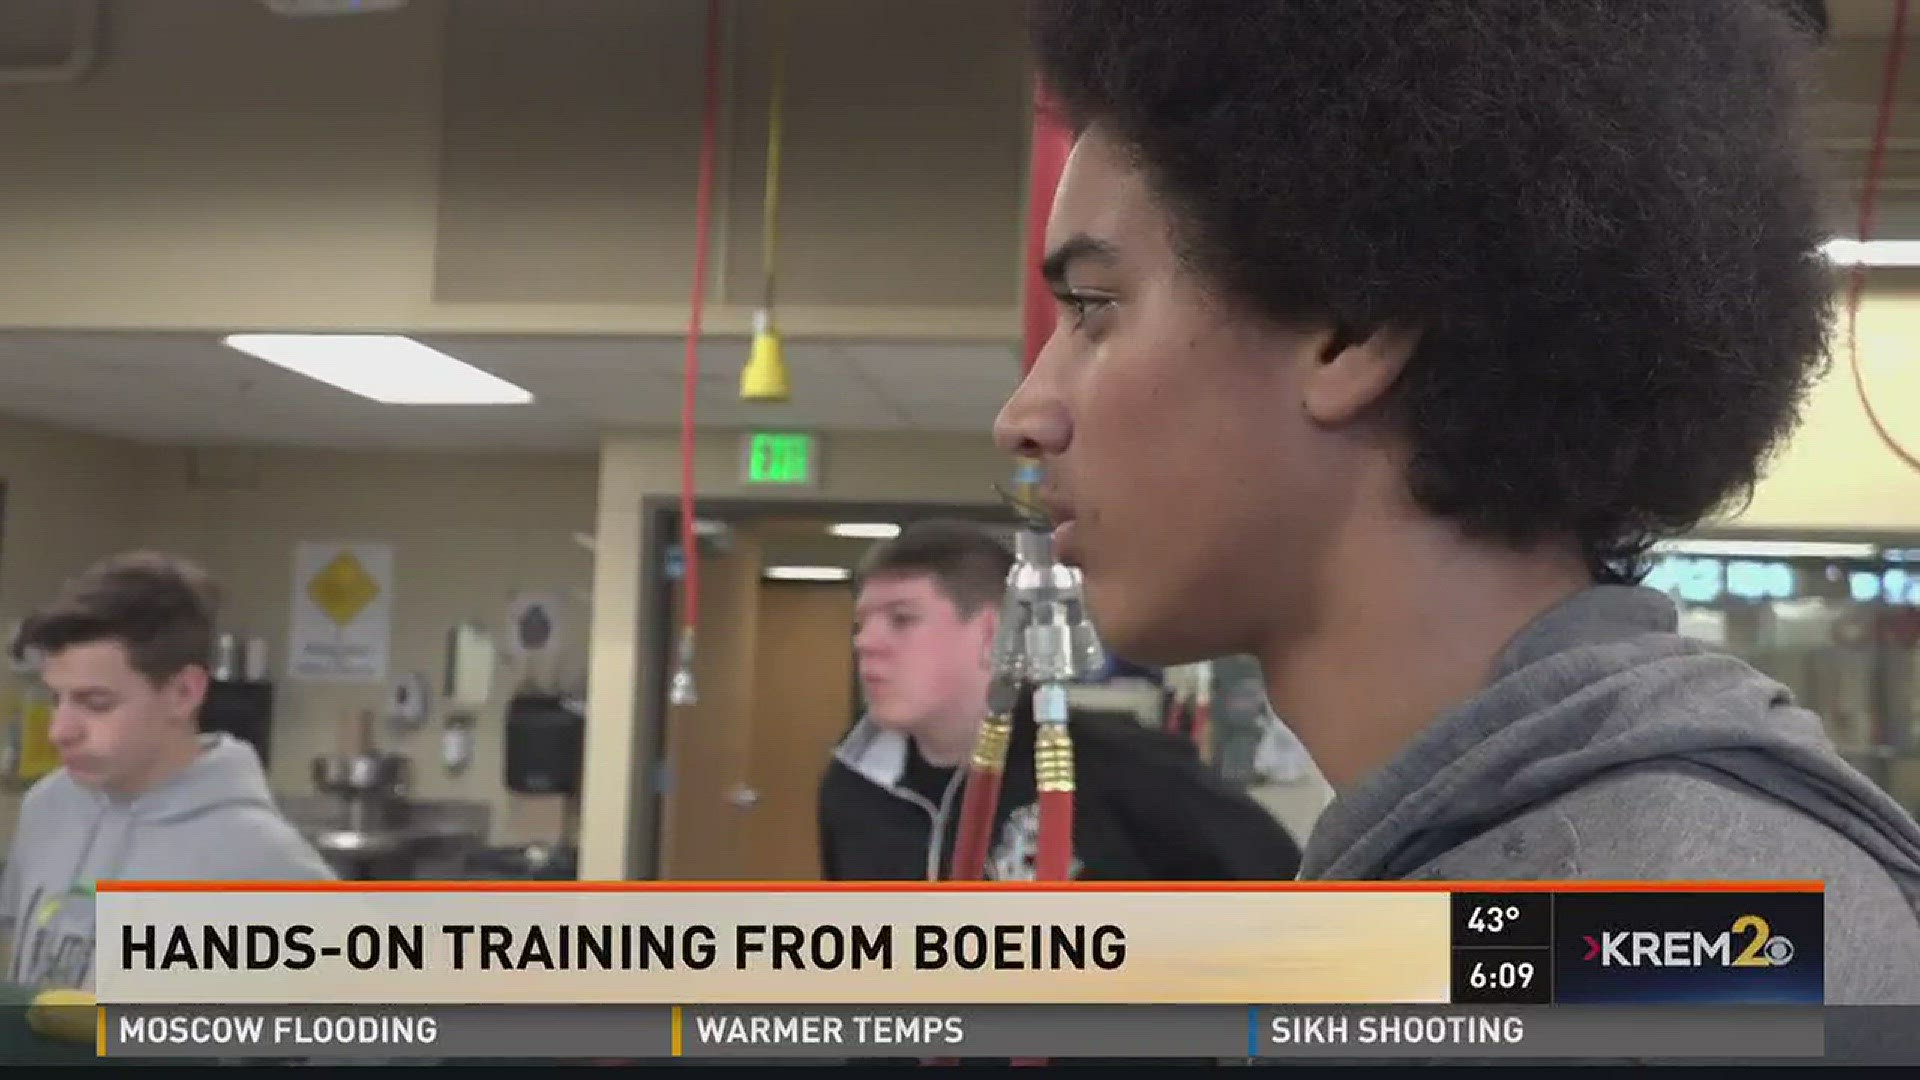 Hands-on training from Boeing